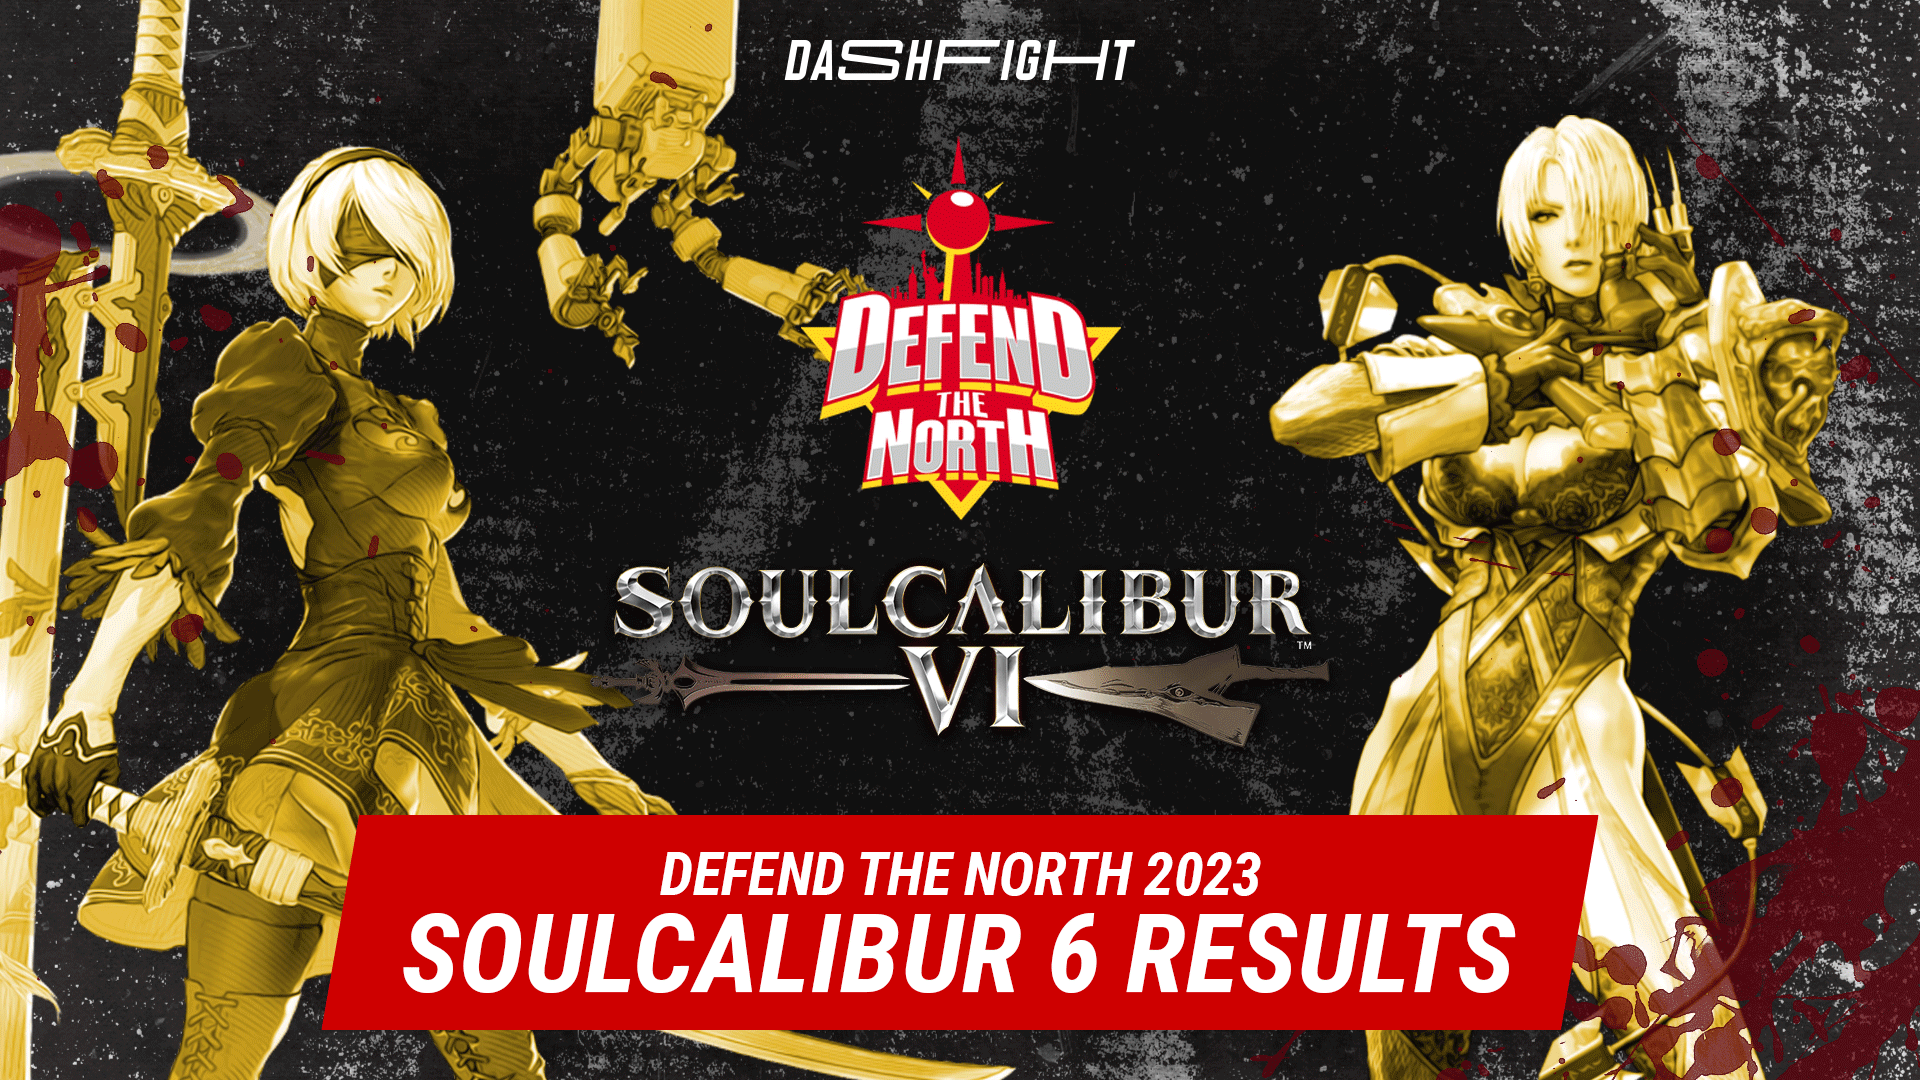 SC6 at Defend The North 2023: A Tough Path to the Title